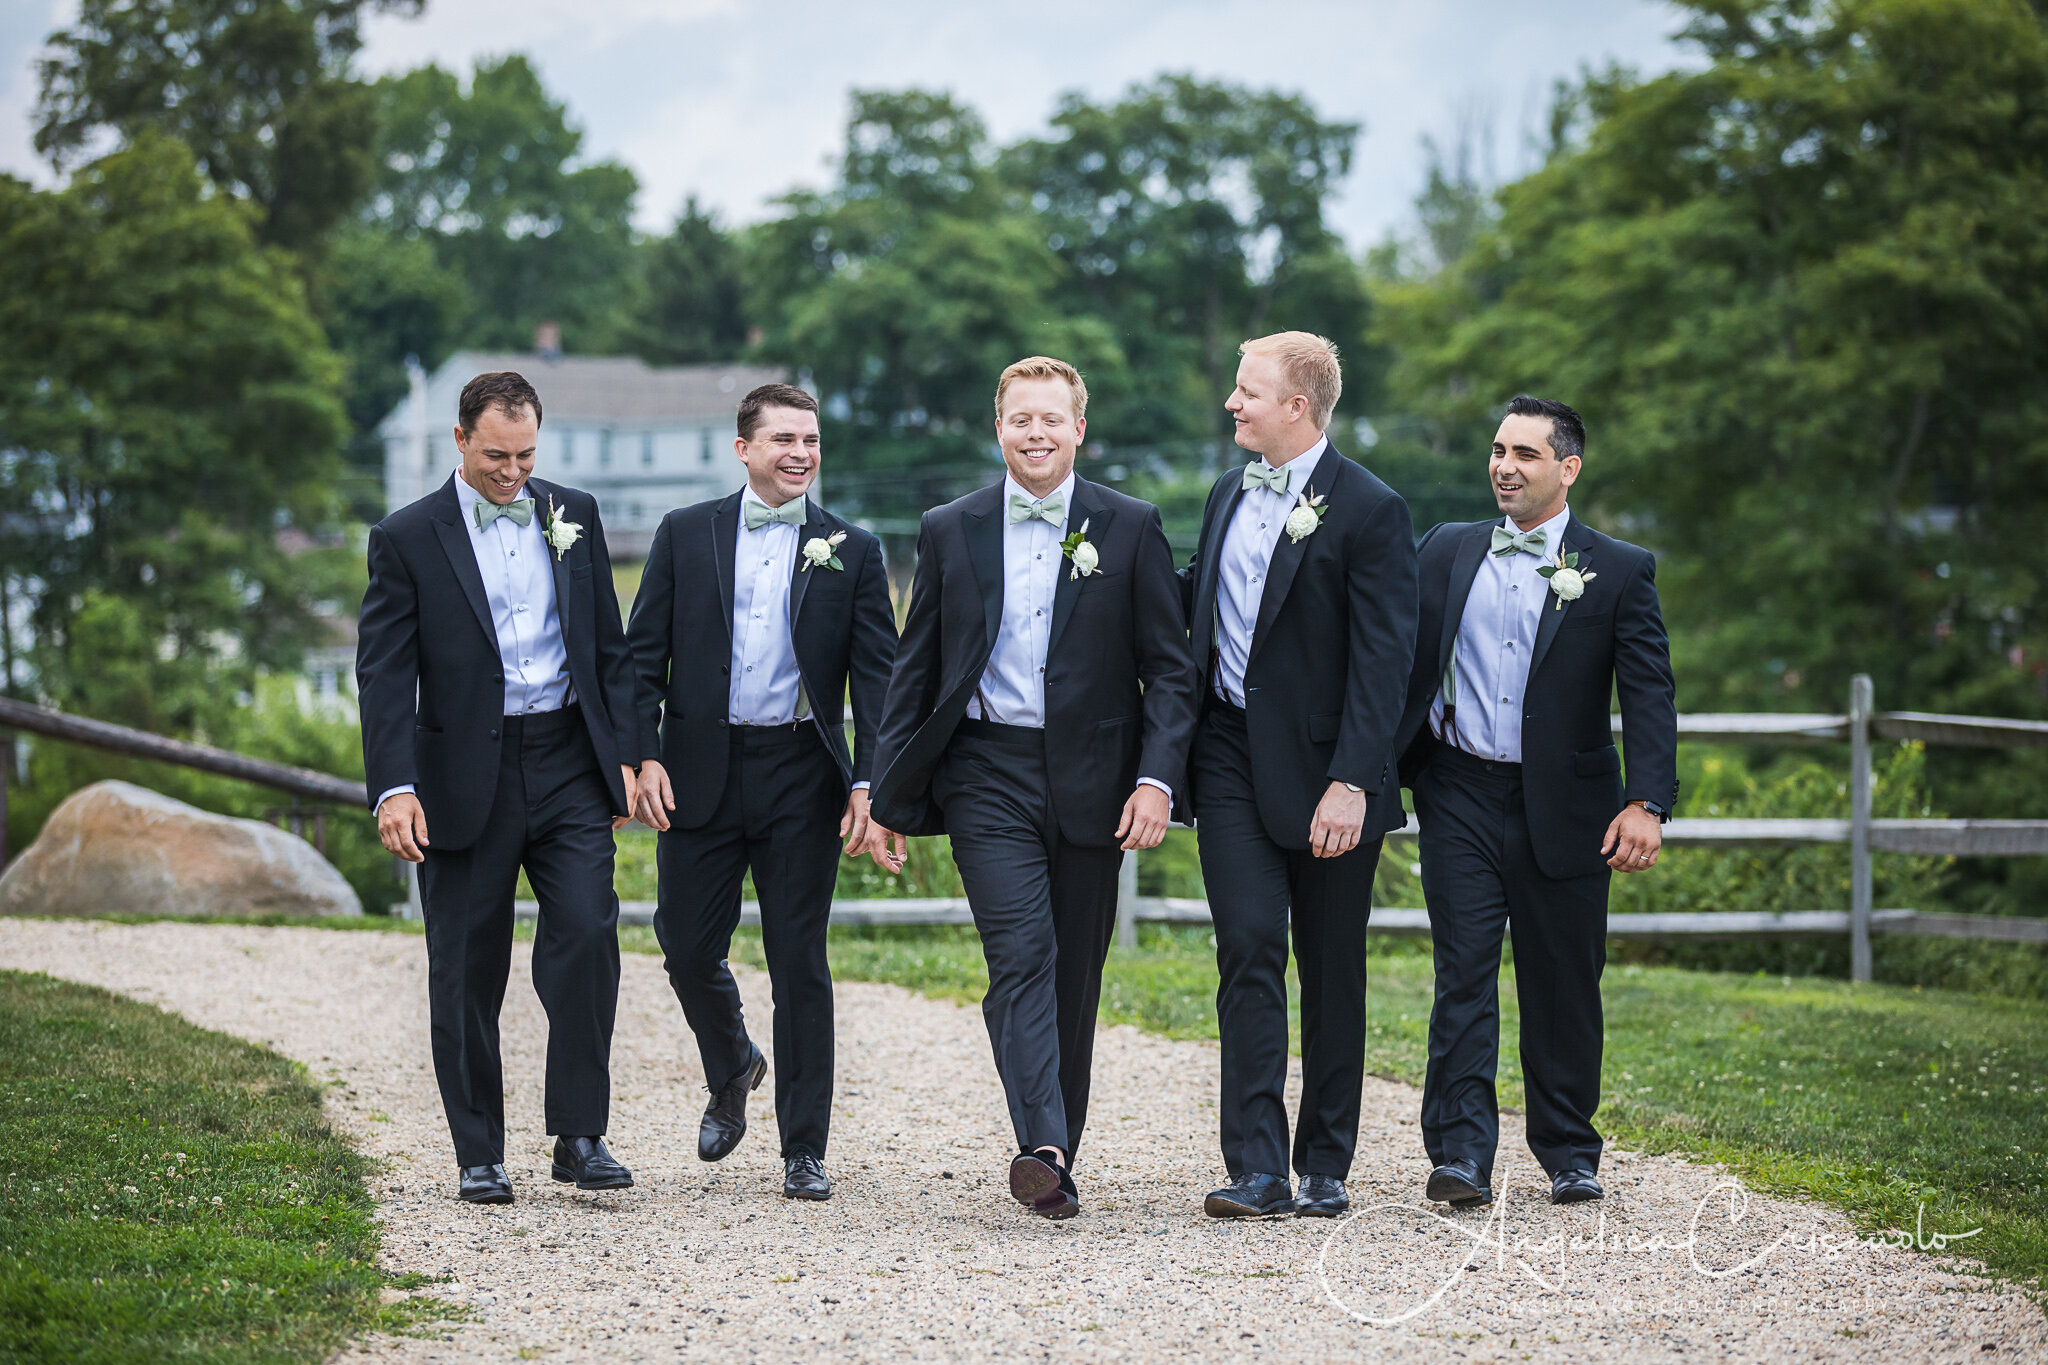 The White Barn South Farms CT Wedding - Angelica Criscuolo Photography